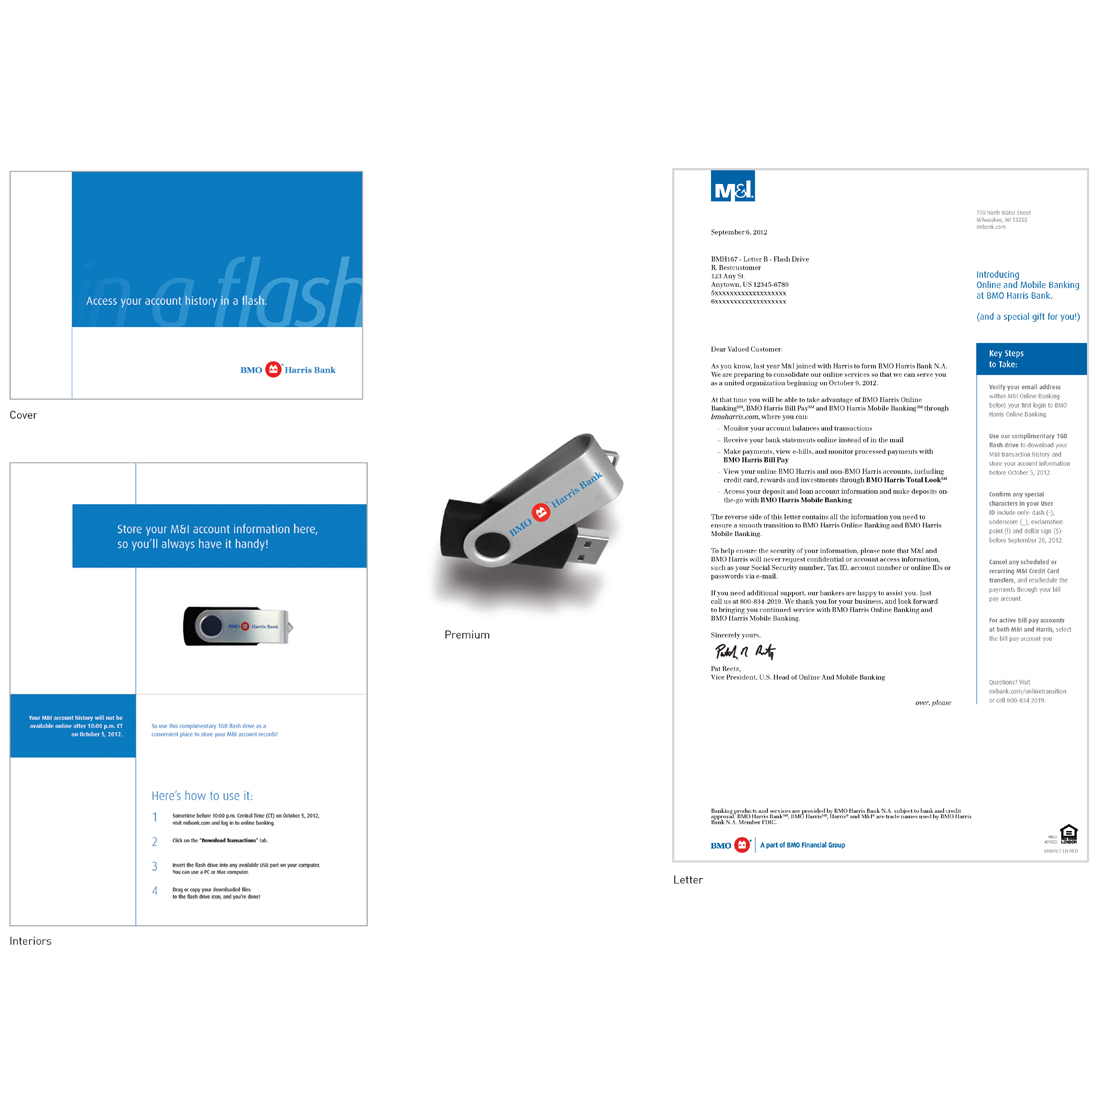 BMO Harris Bank online banking letter, cover, interior, and usb flash drive